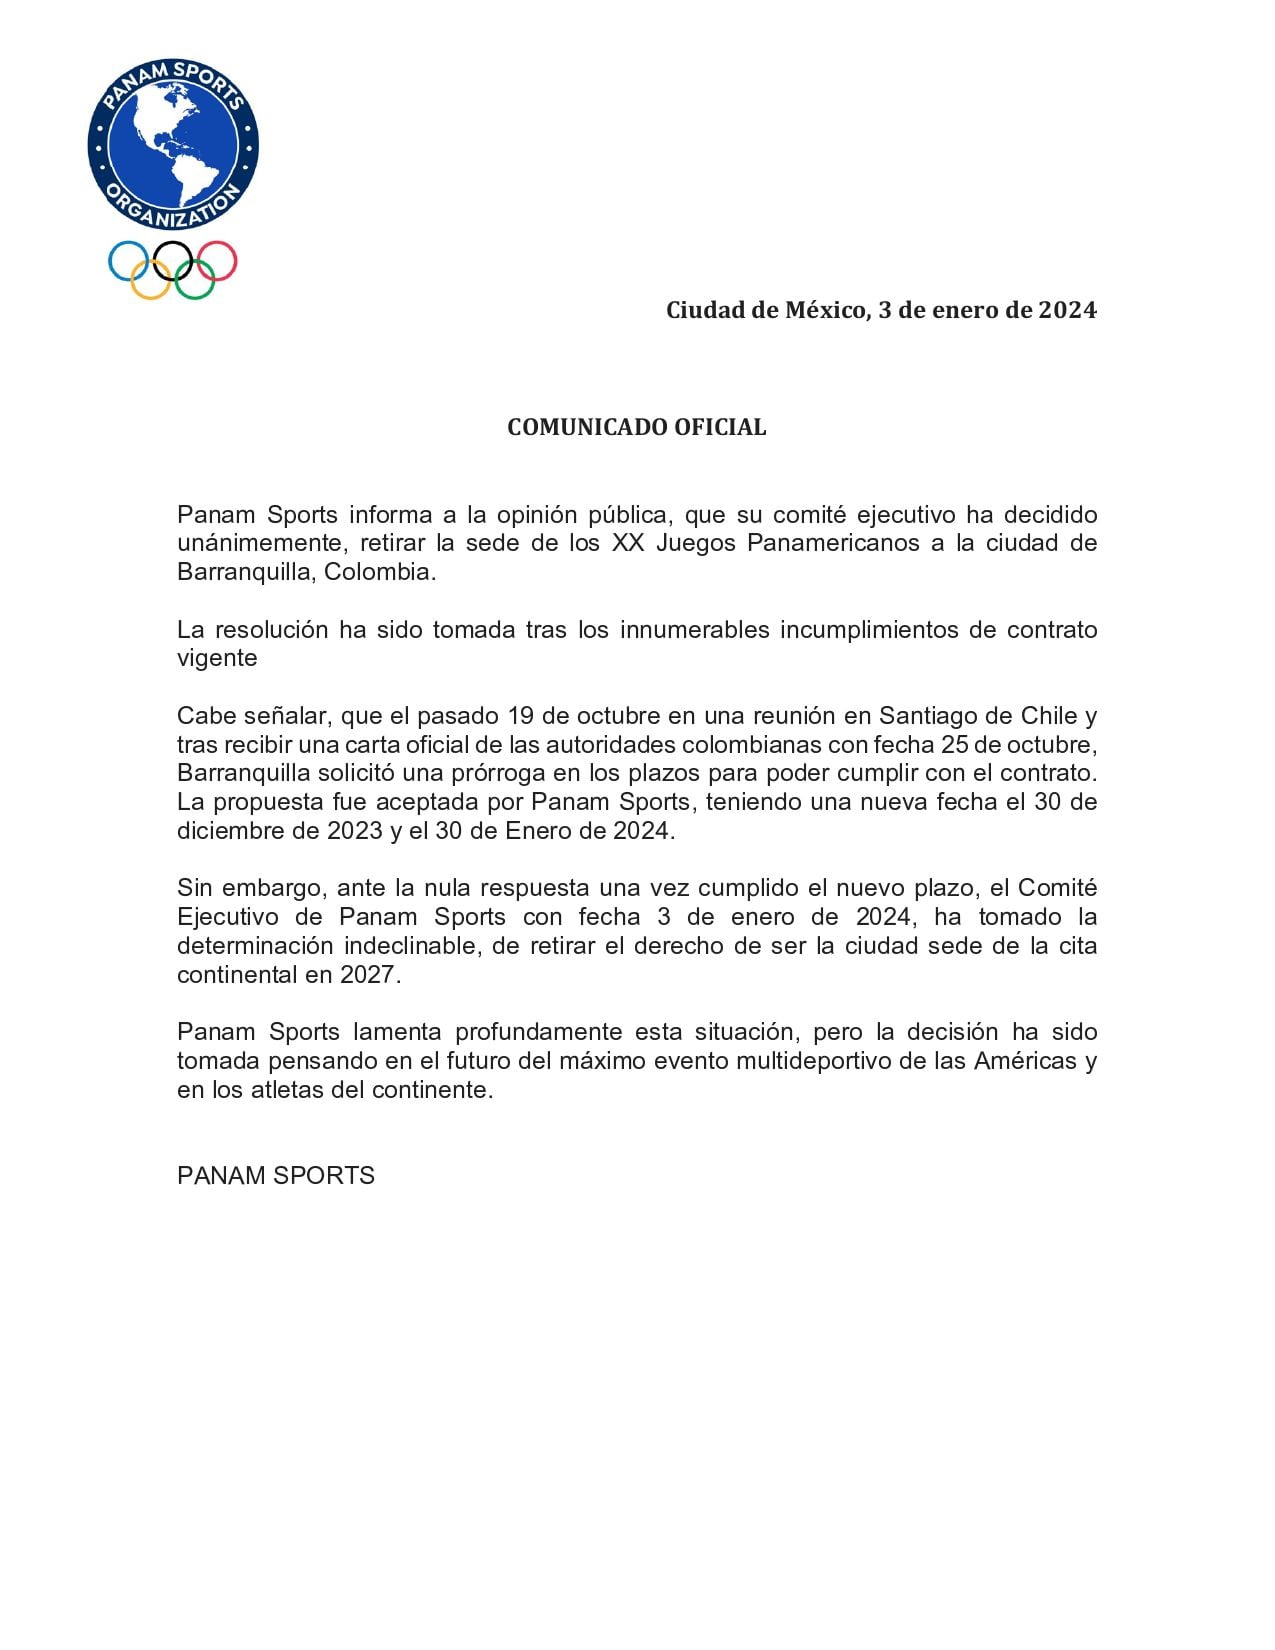 Statement by Panam Sports regarding serious non-compliance with the costs of hosting the 2027 Pan American Games in Barranquilla.